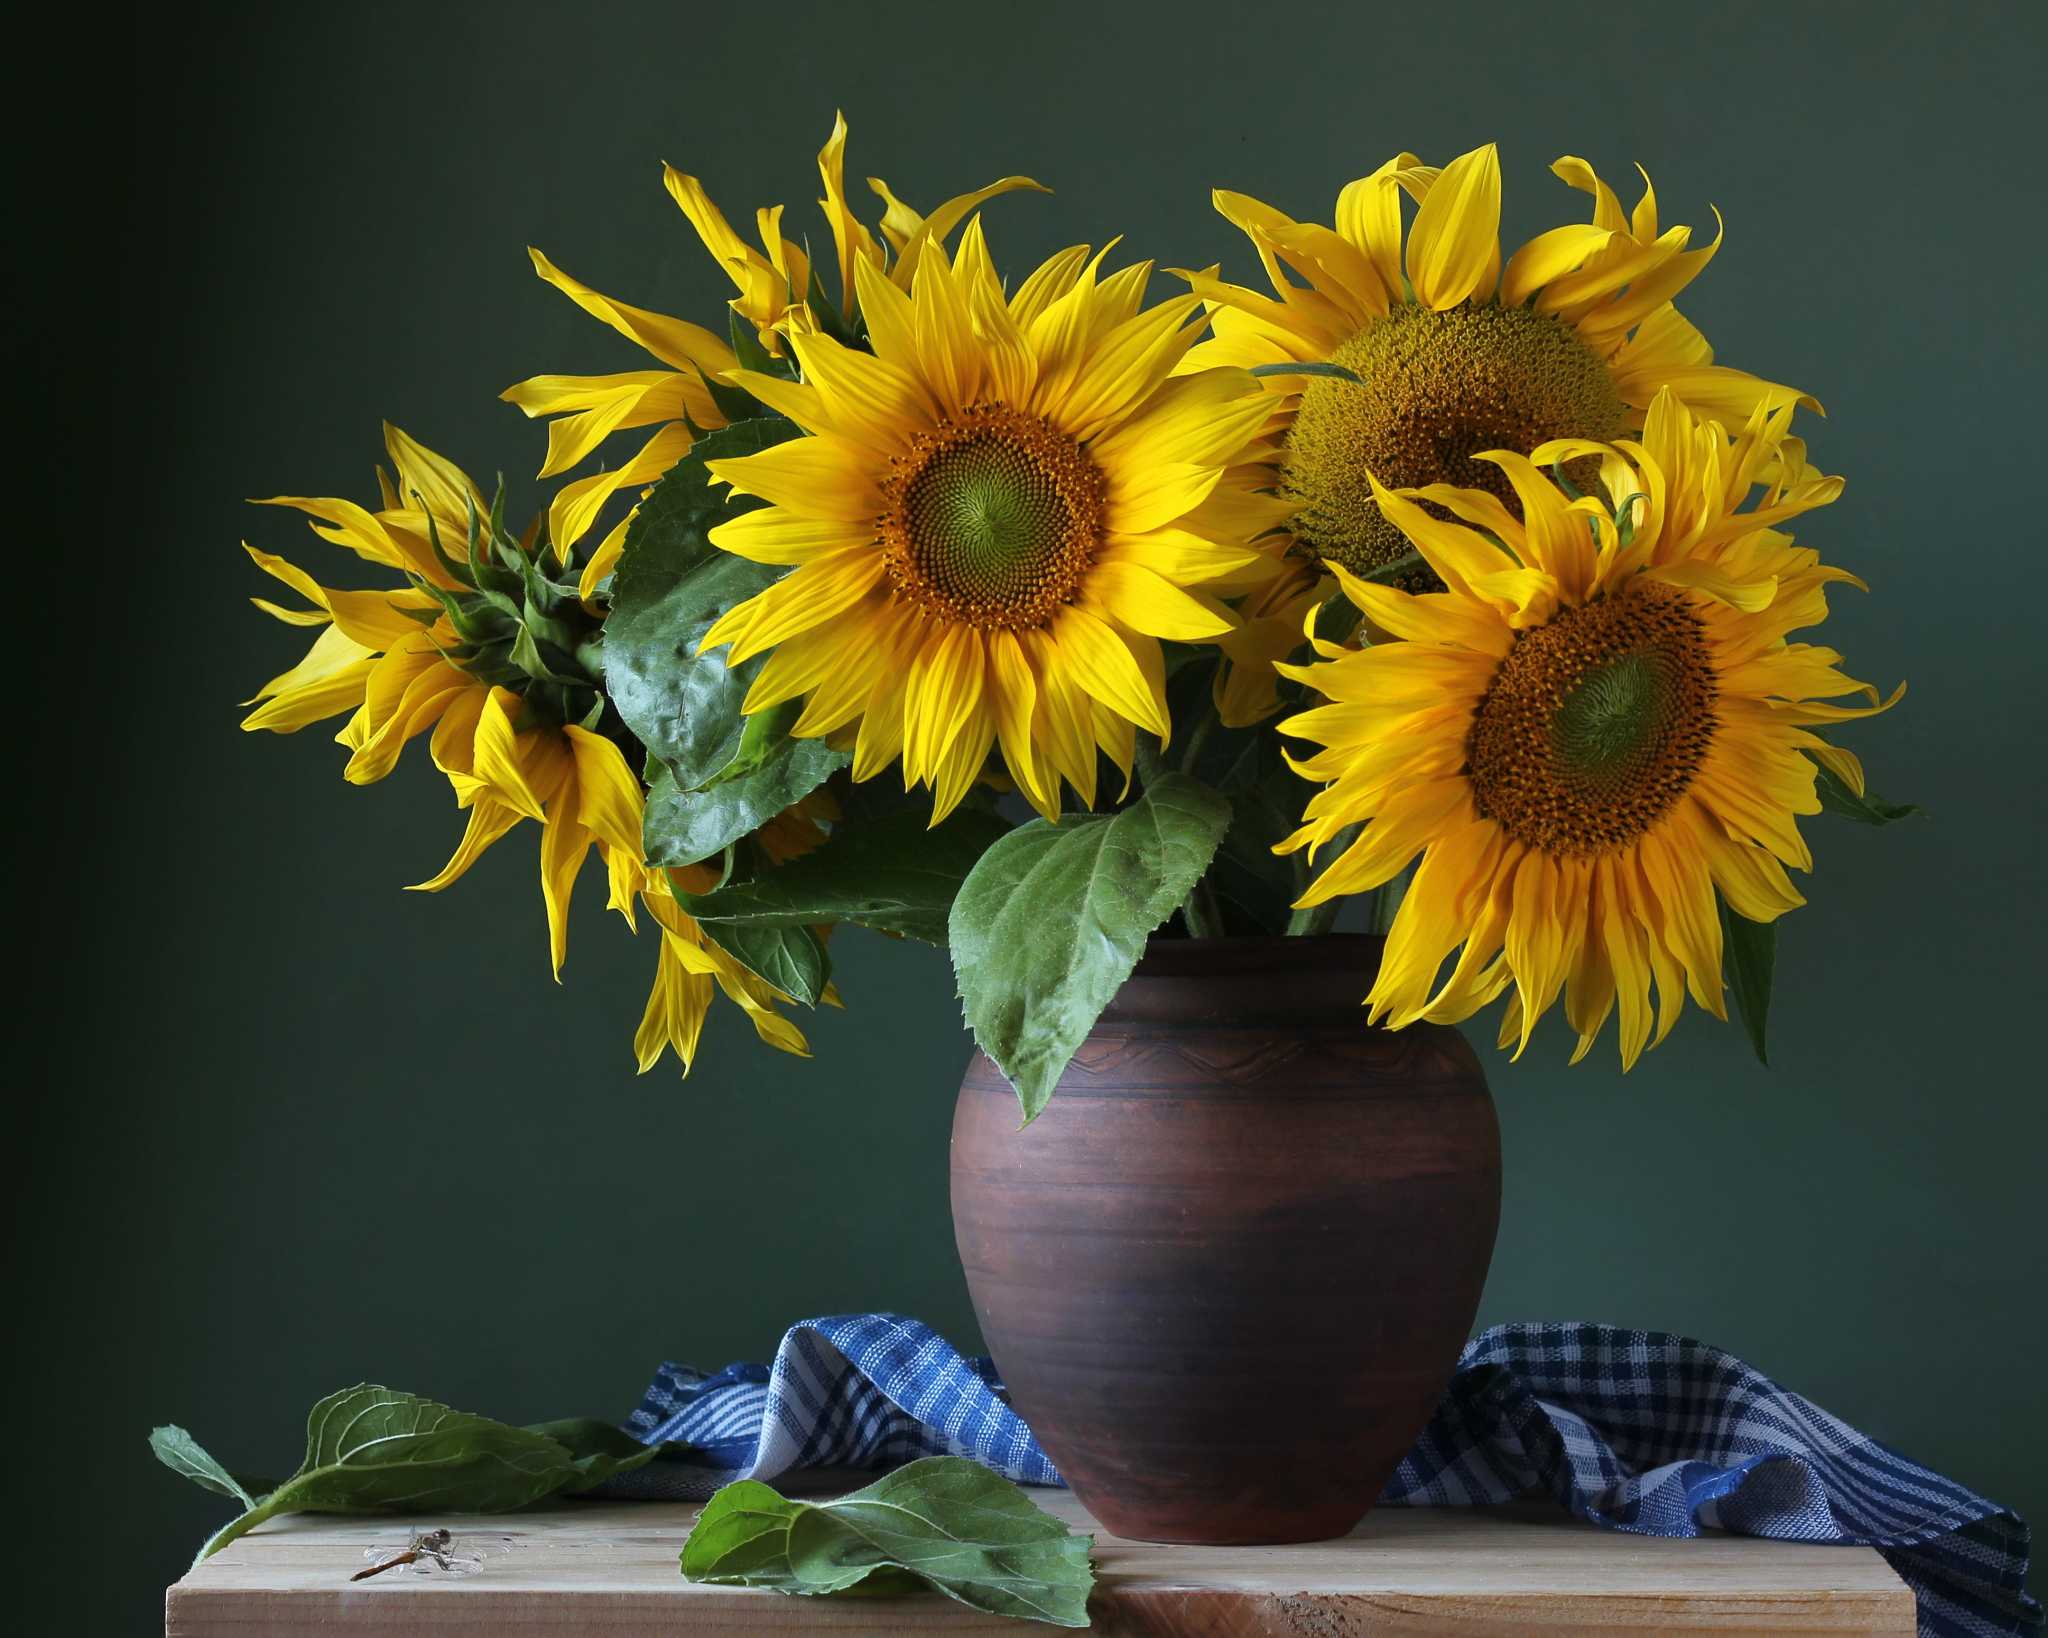 How To Cut Sunflowers To Put In A Vase